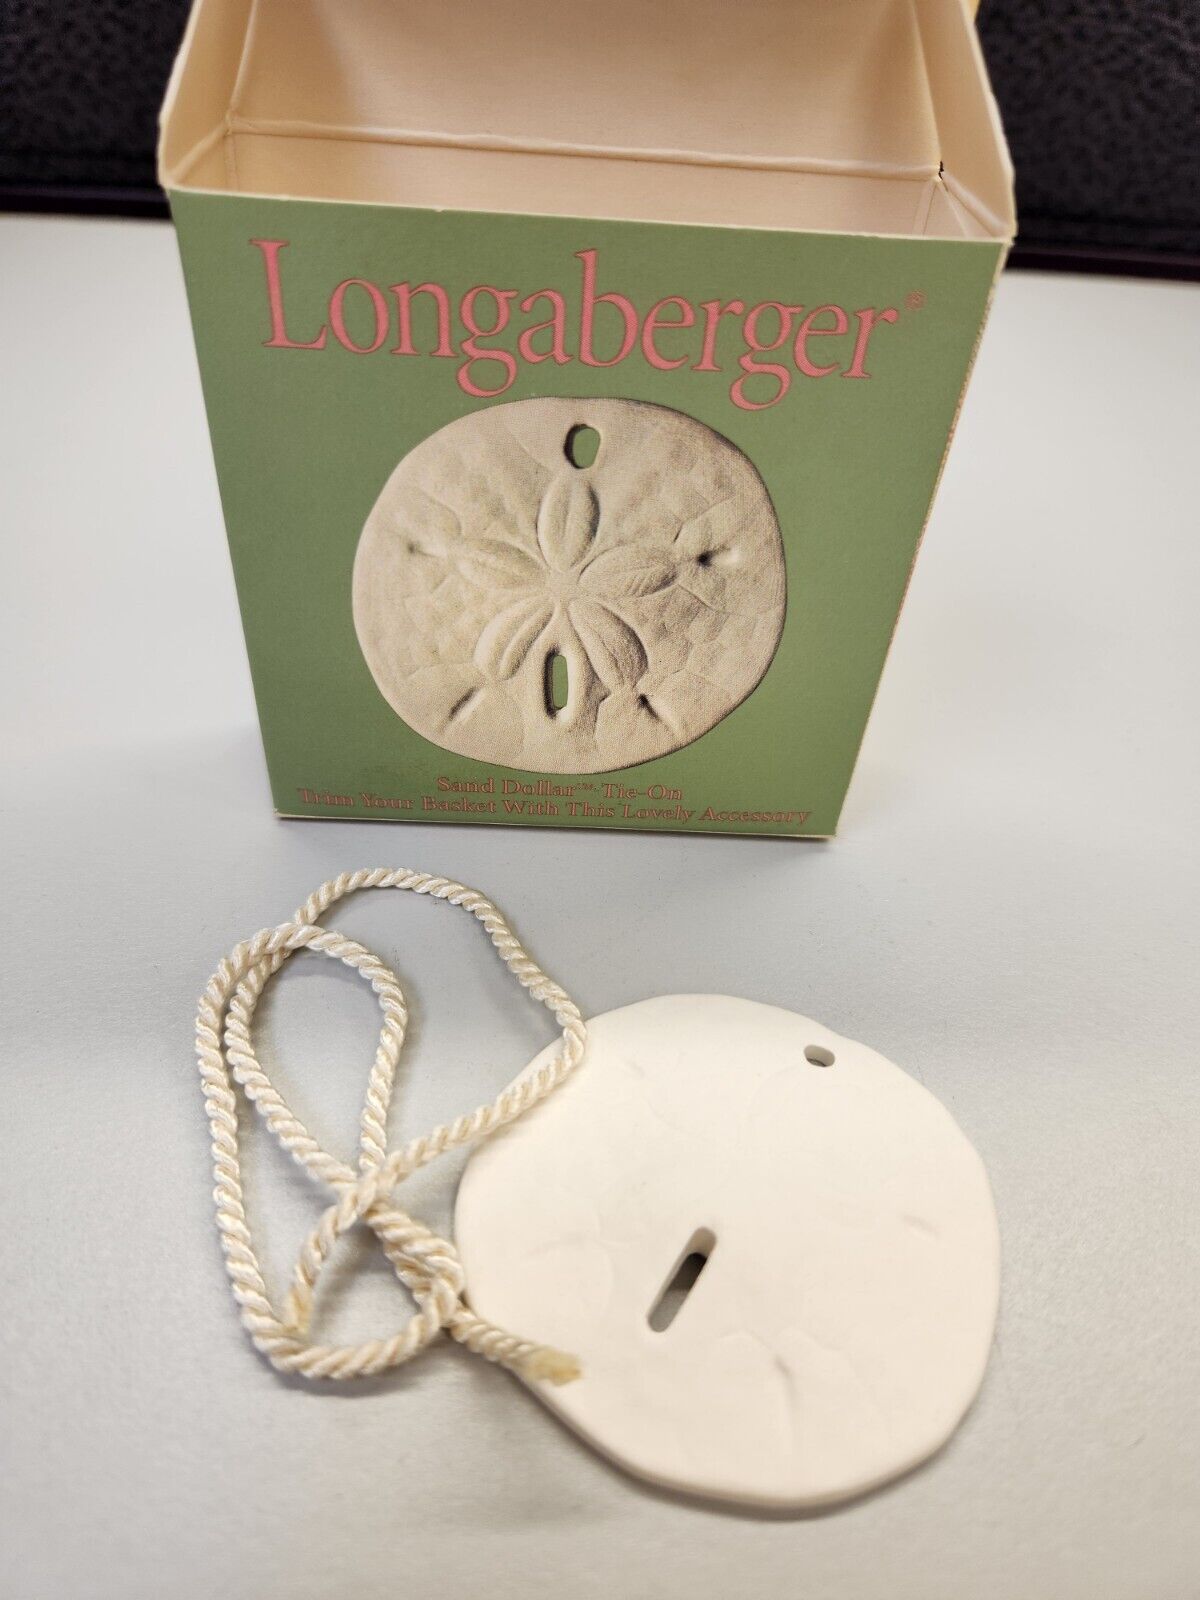 Longaberger Pottery 2001 SAND DOLLAR Tie On #39551  IN BOX  MADE IN USA